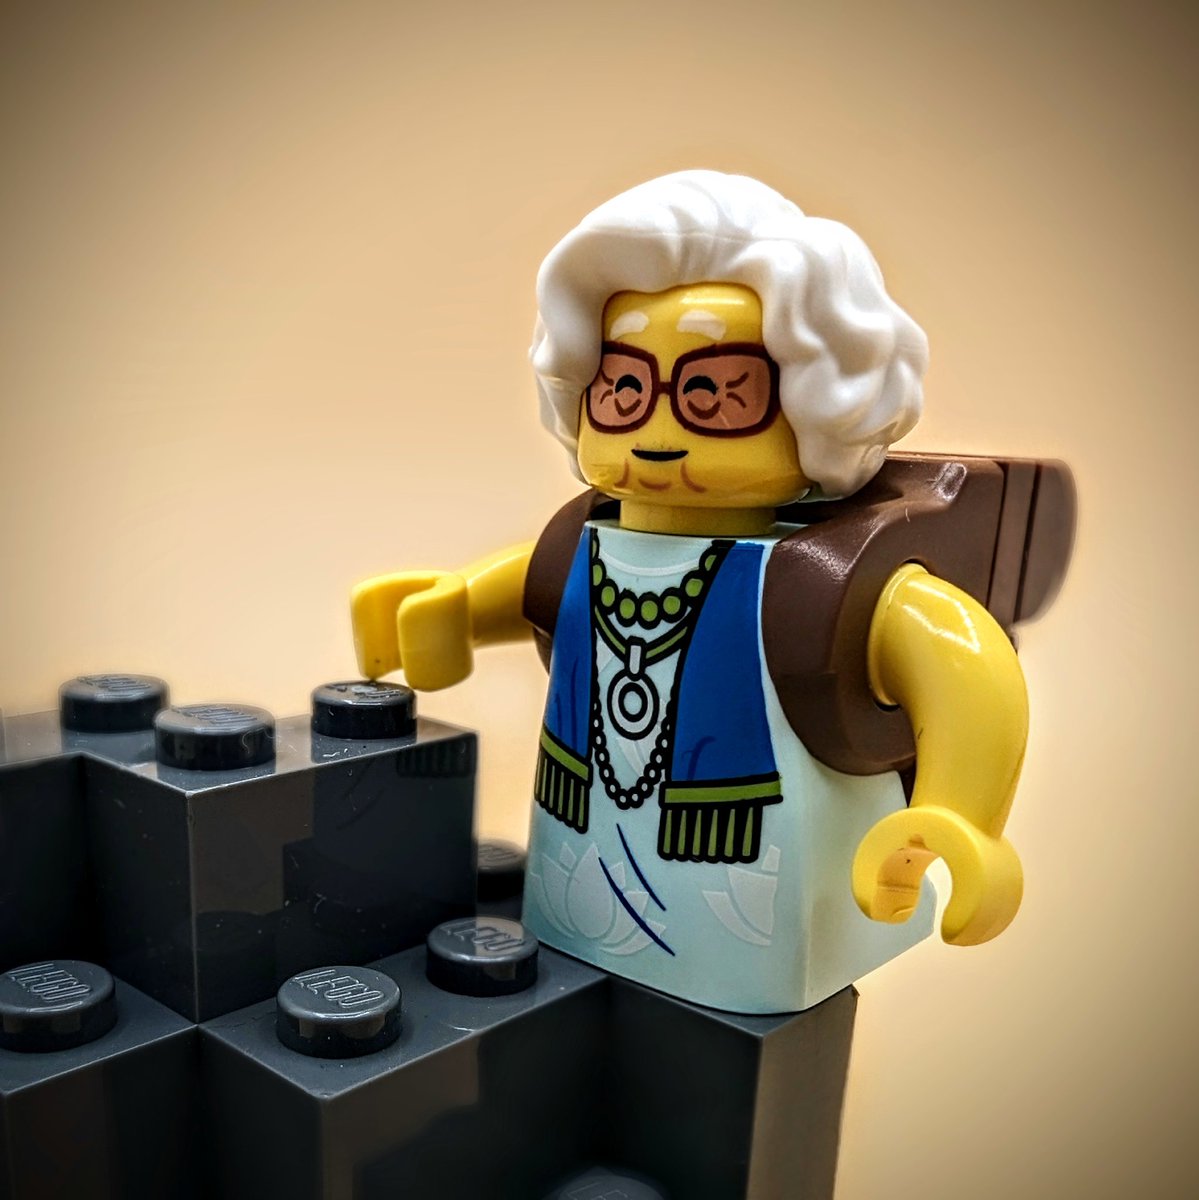 Don't mistake Mrs. Castillo for a sweet unassuming granny. She's a surprisingly sturdy #Lego #minifigure
#LegoPhotography of a groovy older #LegoDreamzzz character.